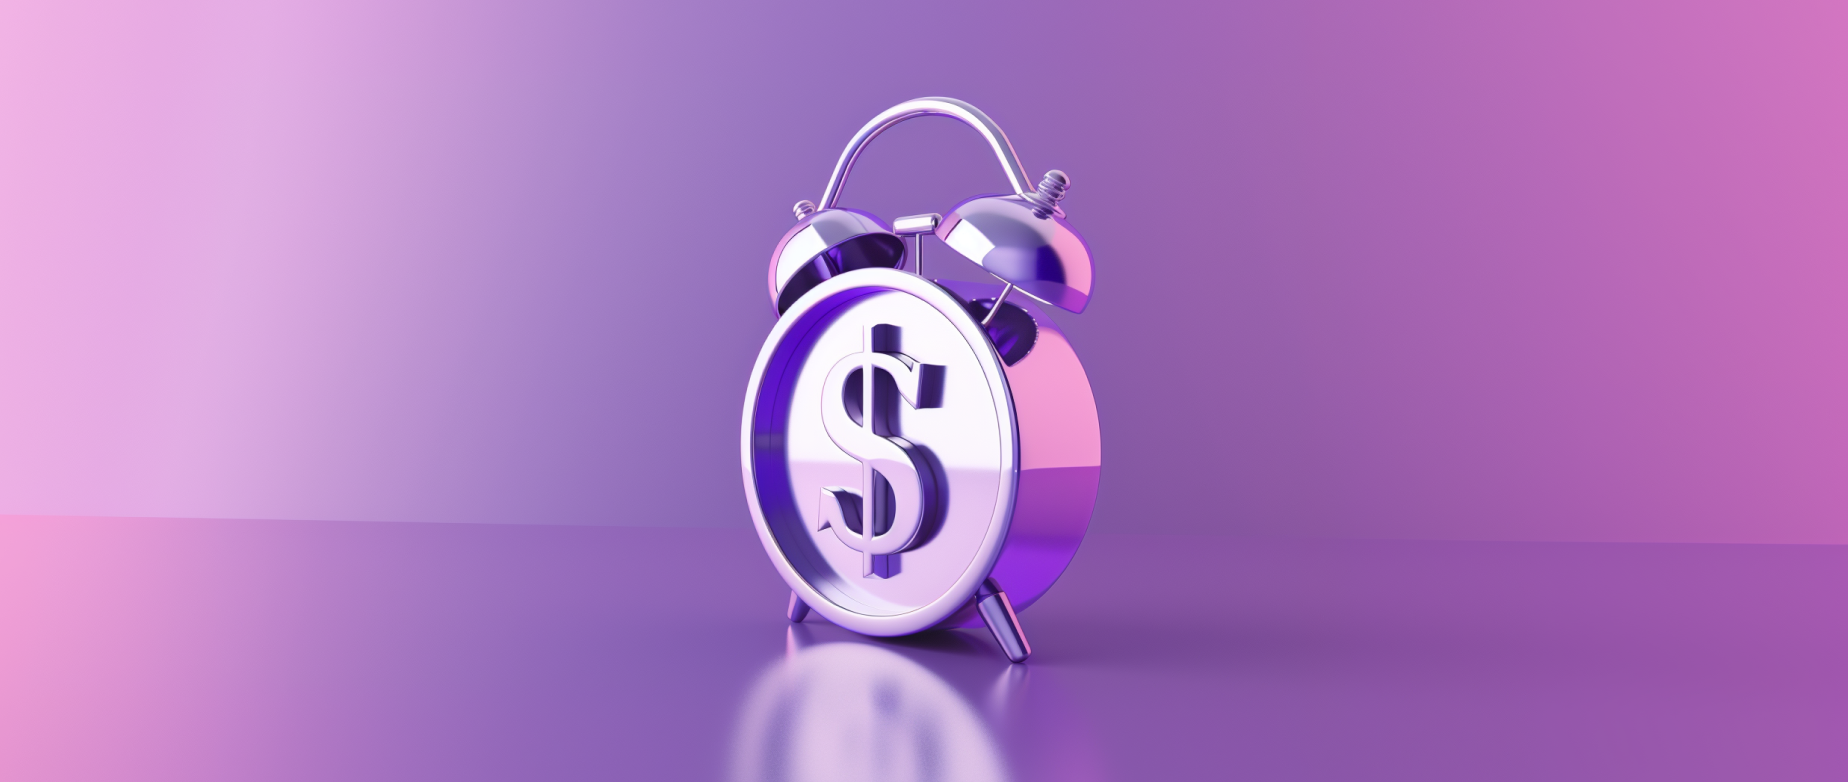 A silver alarm clock with a US dollar sign on the face on a purple background.